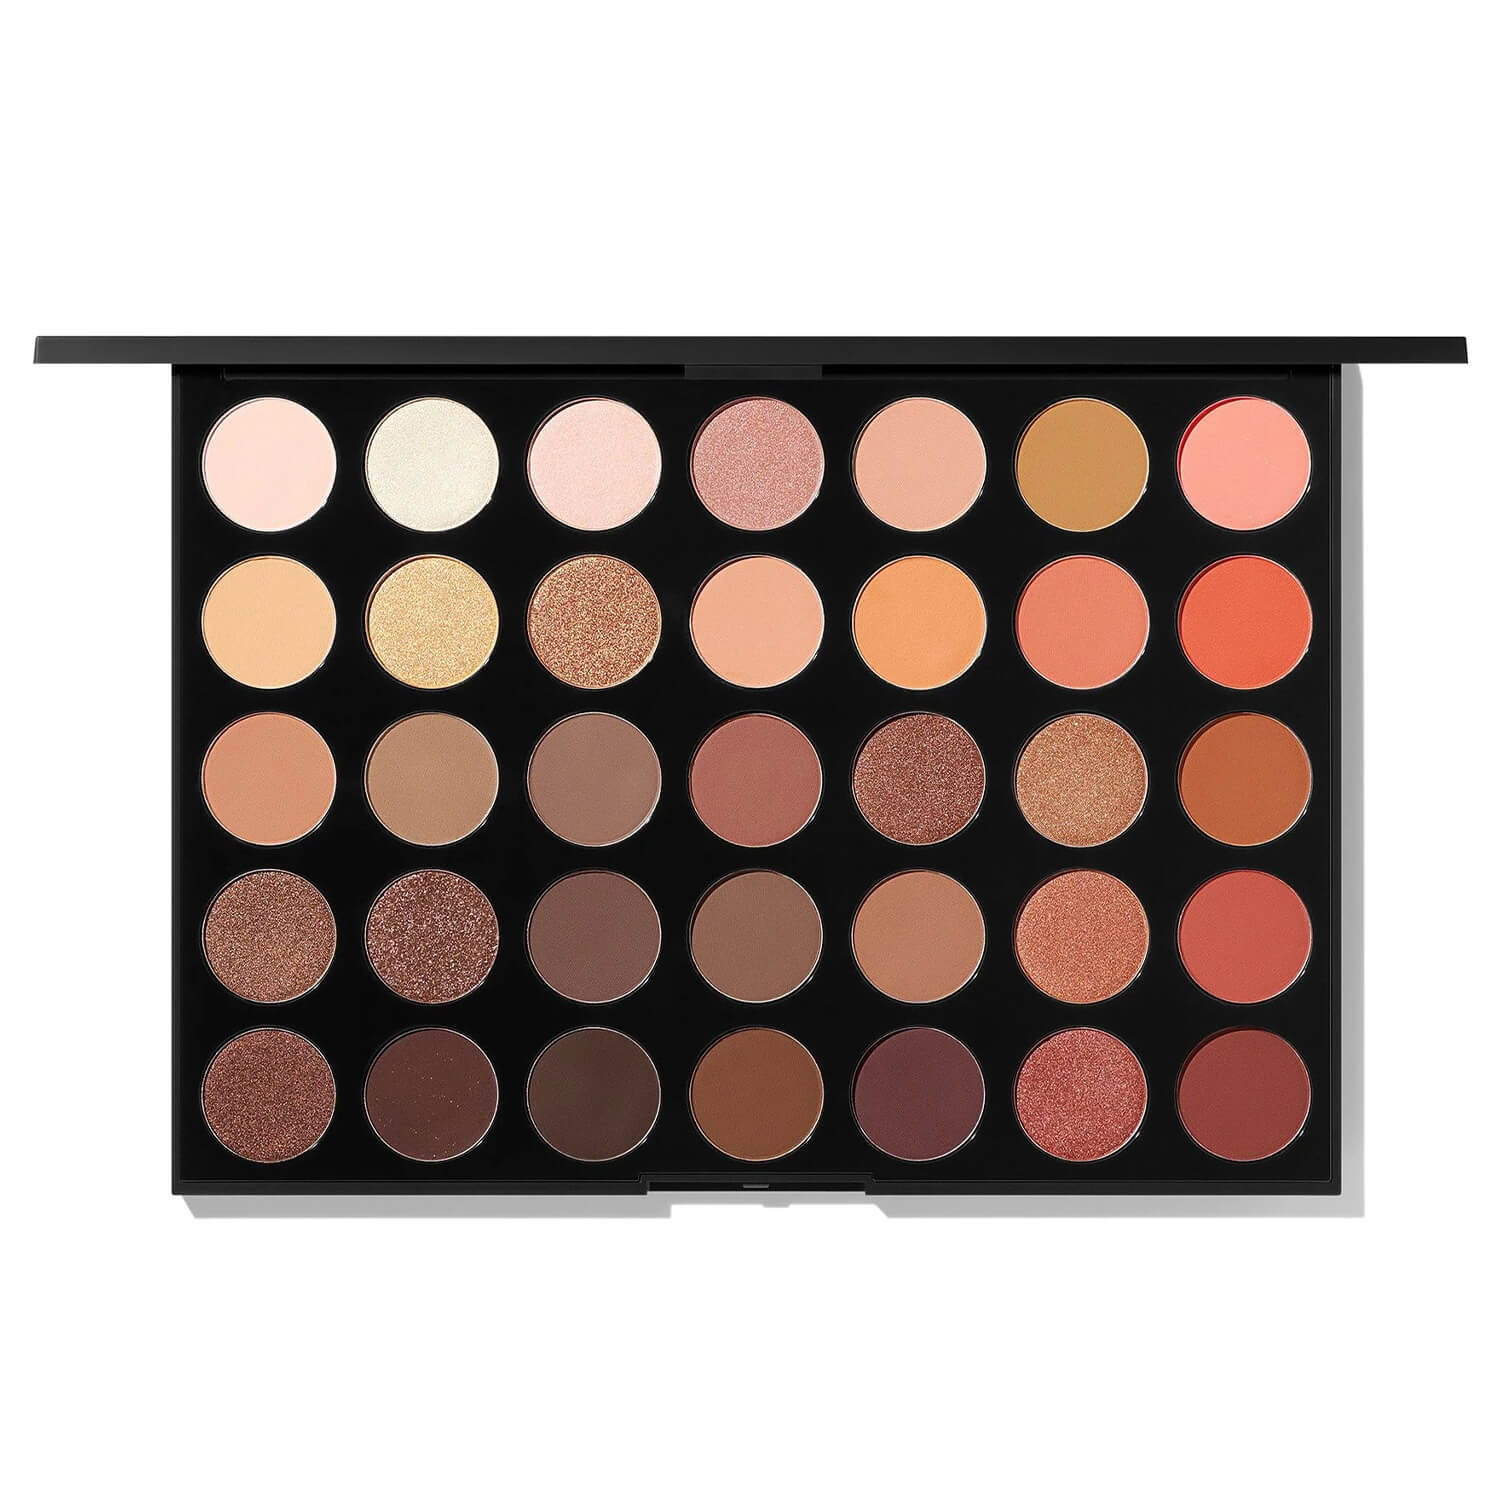 Shop 100% original Morphe 35O Supernatural Glow Artistry Palette available at Heygirl.pk for delivery in Pakistan. 